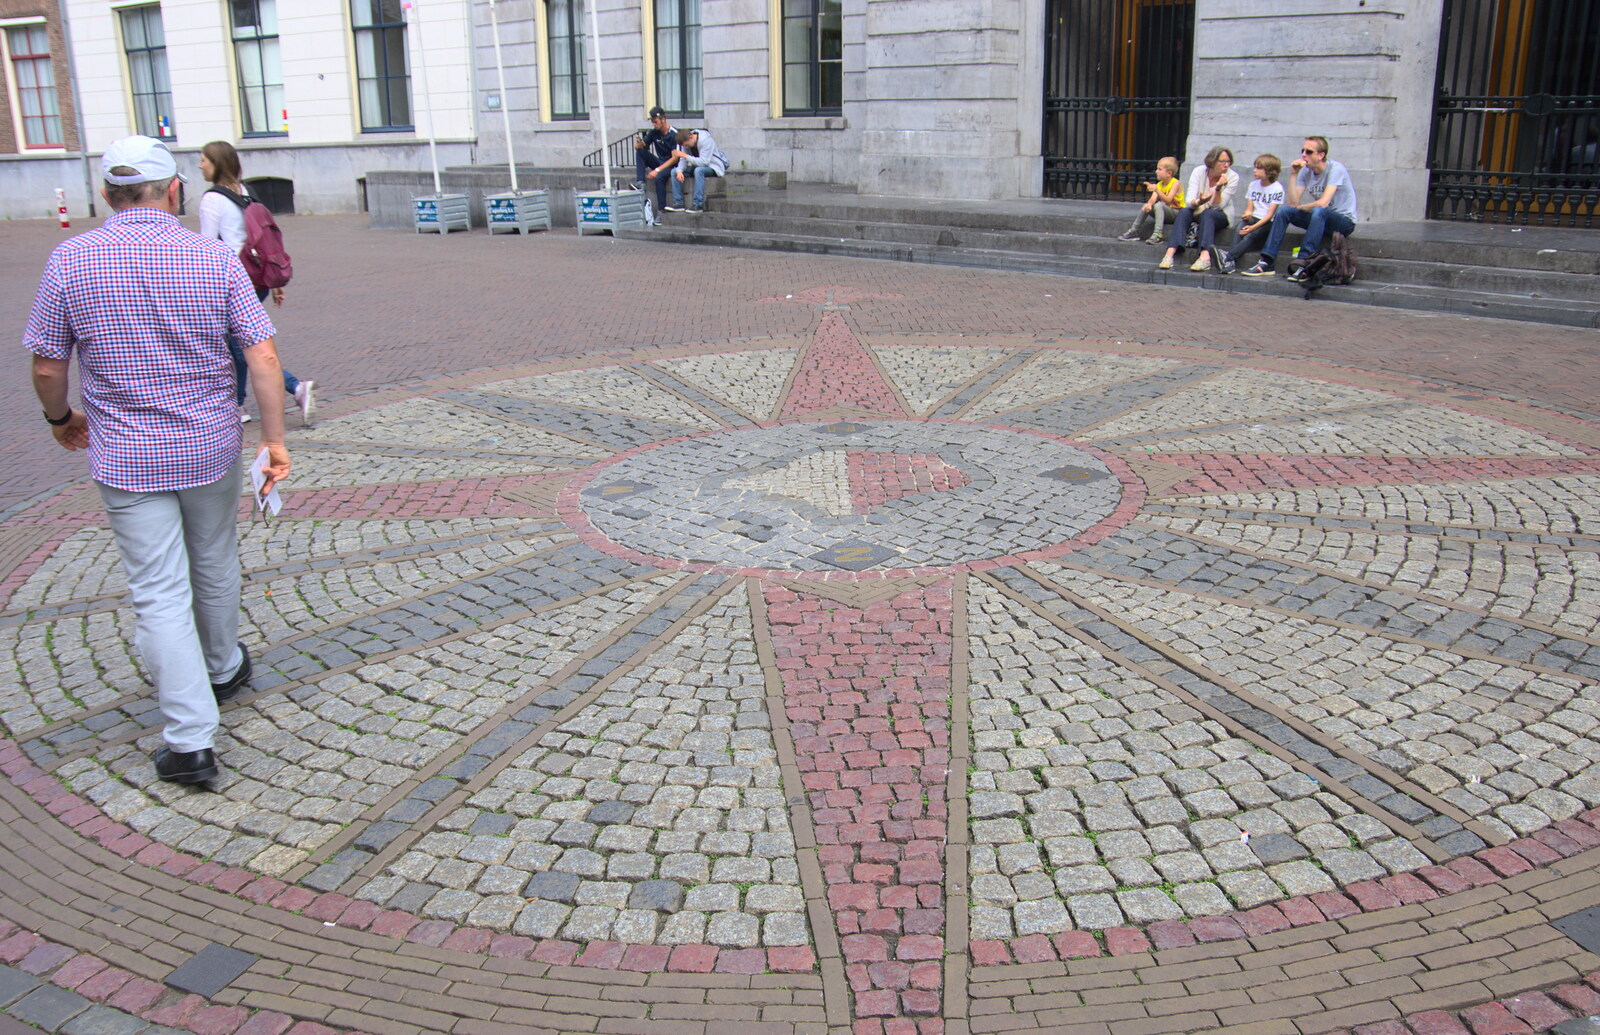 Hamish strolls across a massive paved compass rose from A Postcard from Utrecht, Nederlands - 10th June 2018